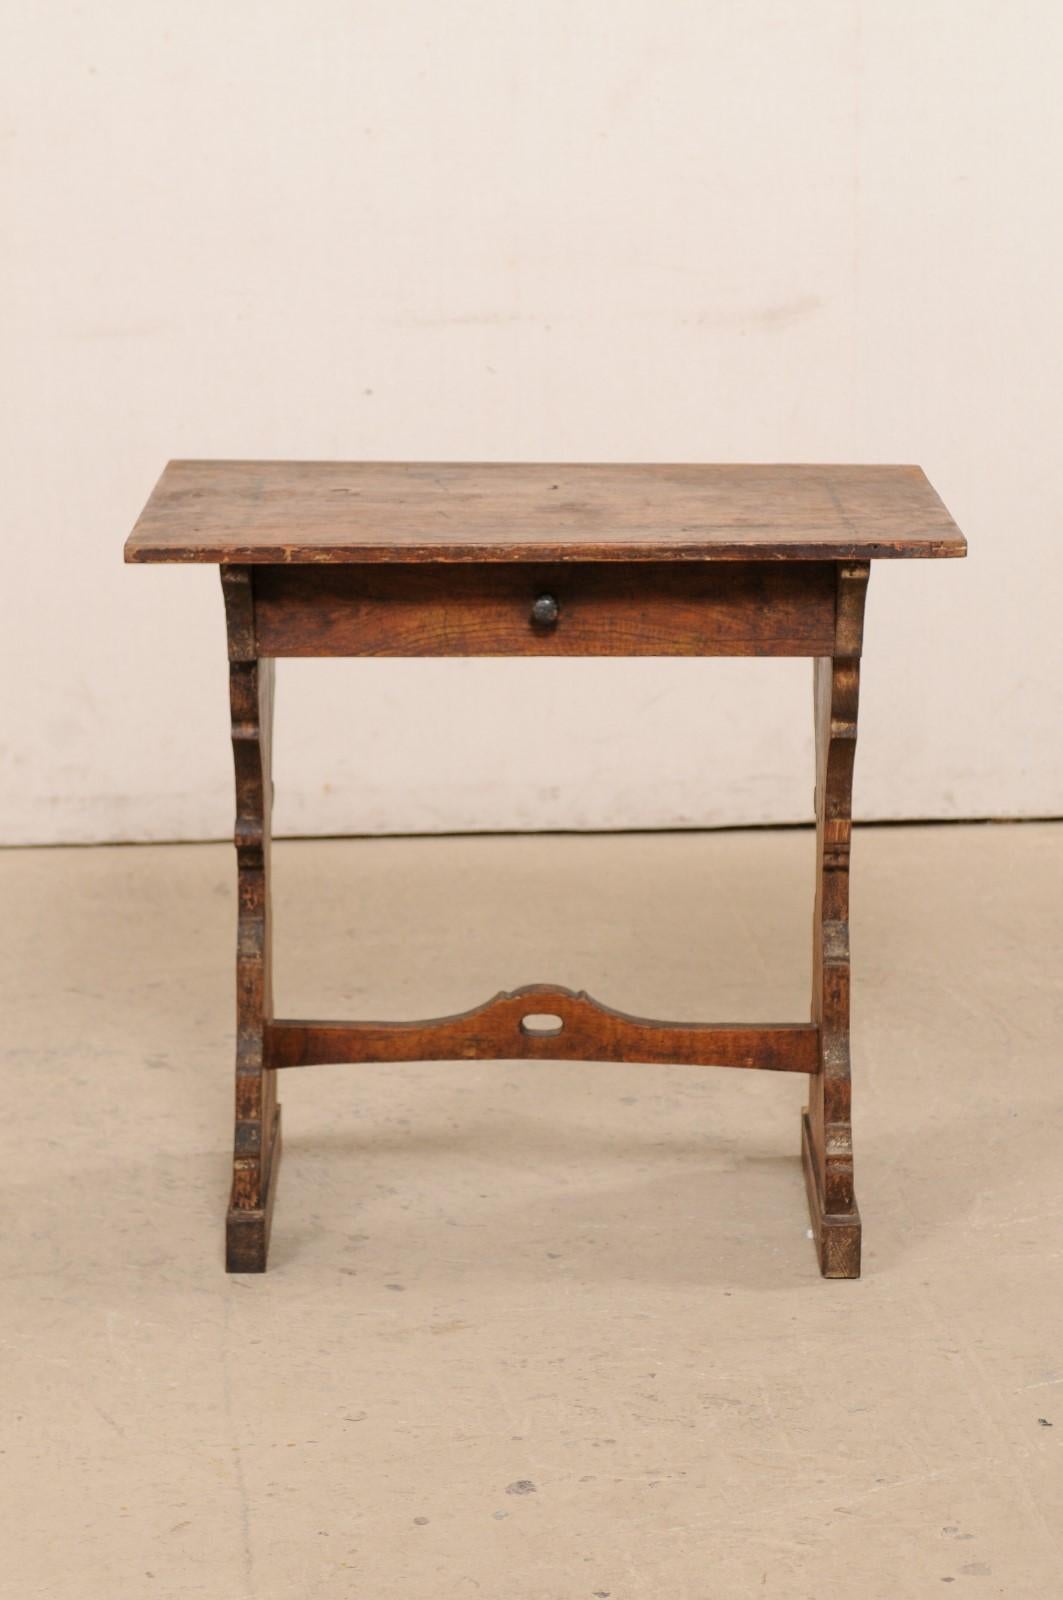 Italian Smaller-Sized Table or Writing Desk w/Shapely Hourglass Legs, 19th C. For Sale 6